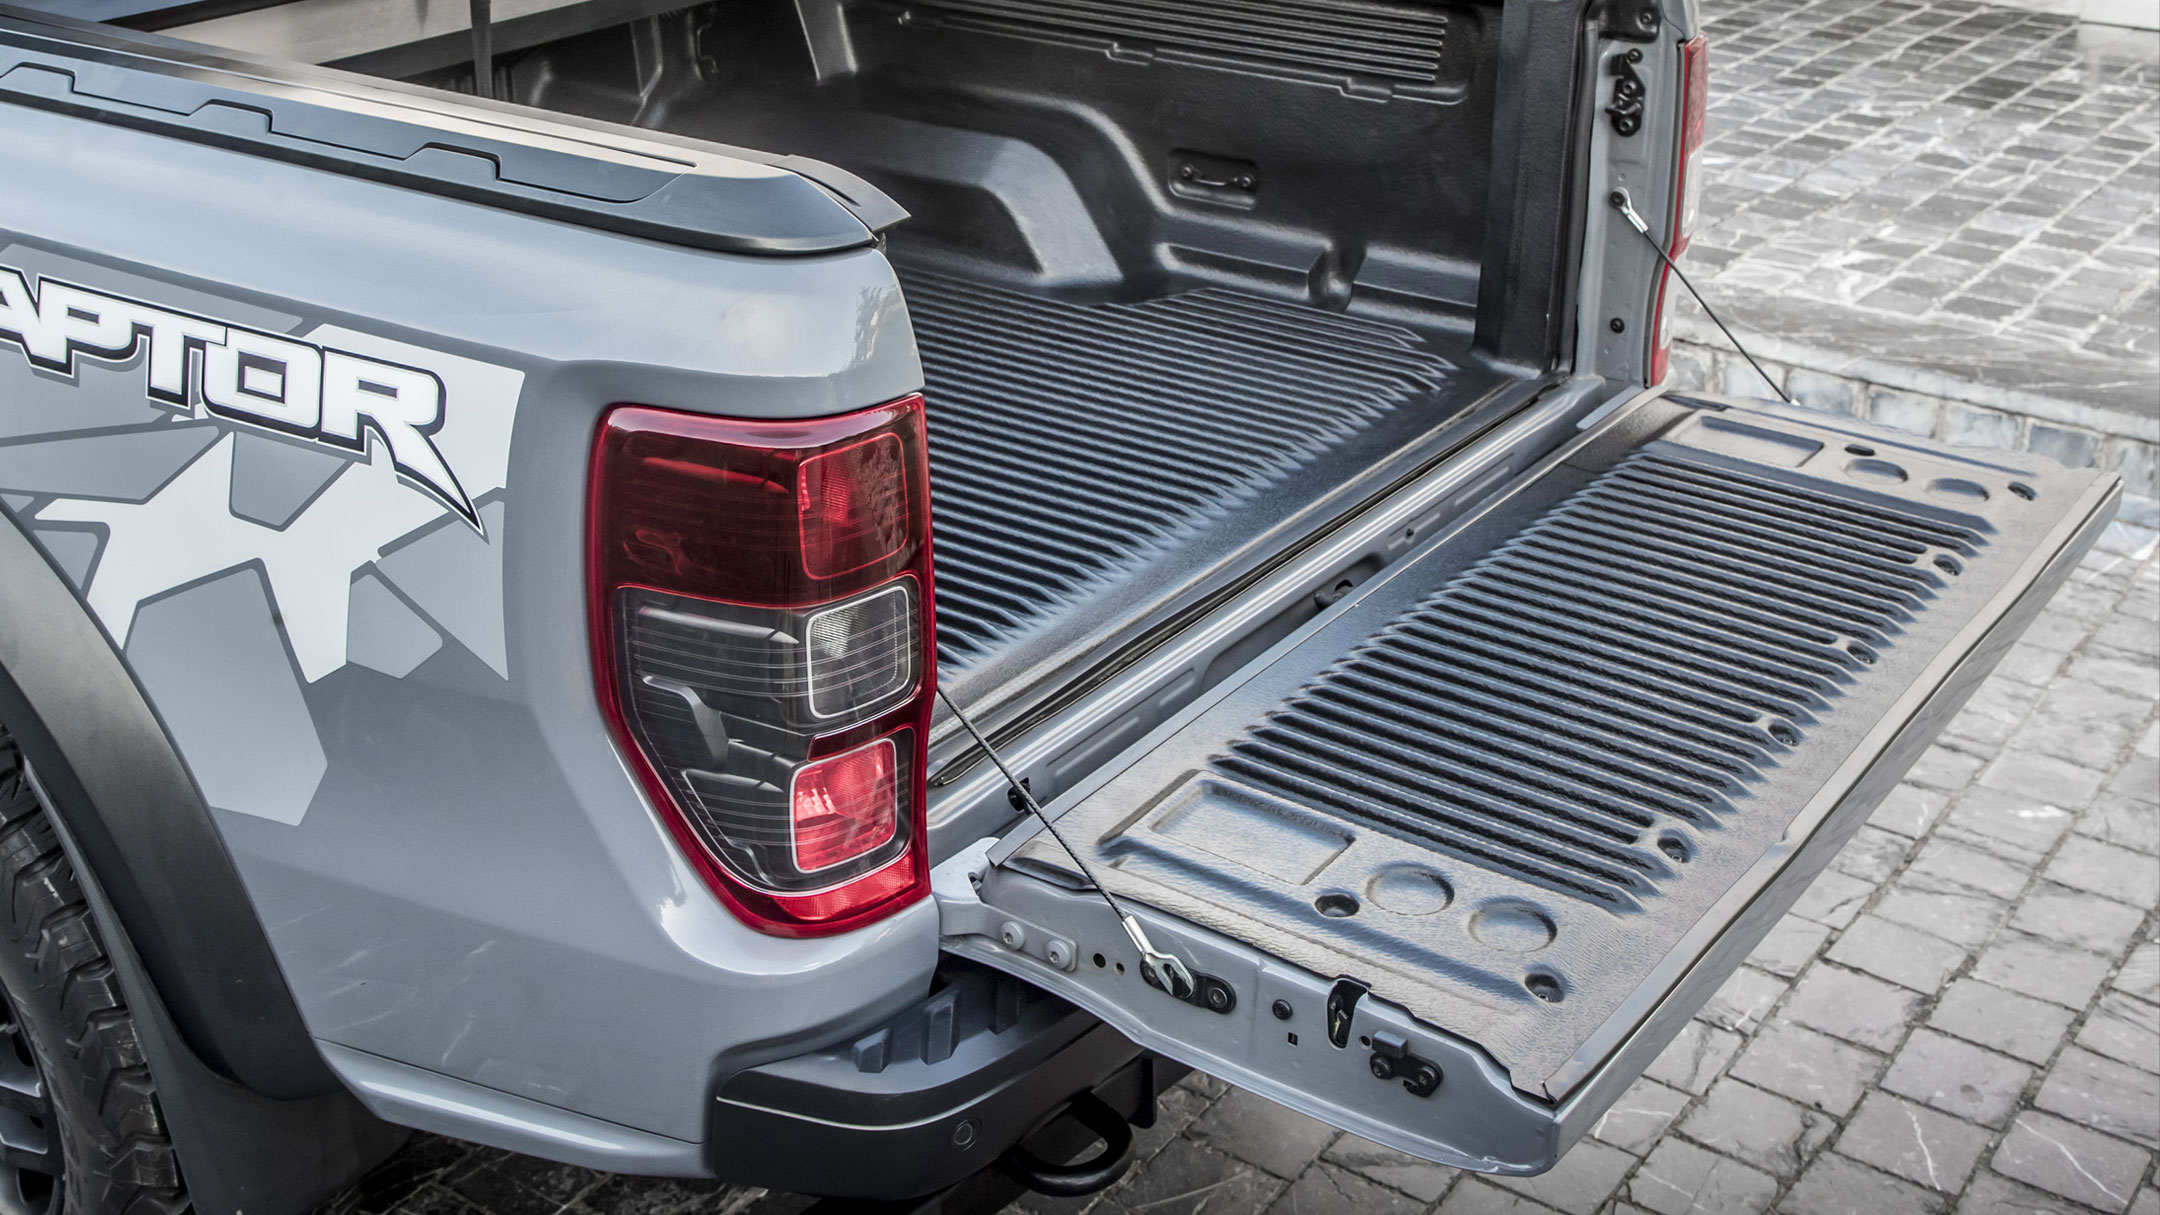 Ford Ranger rear bed close up